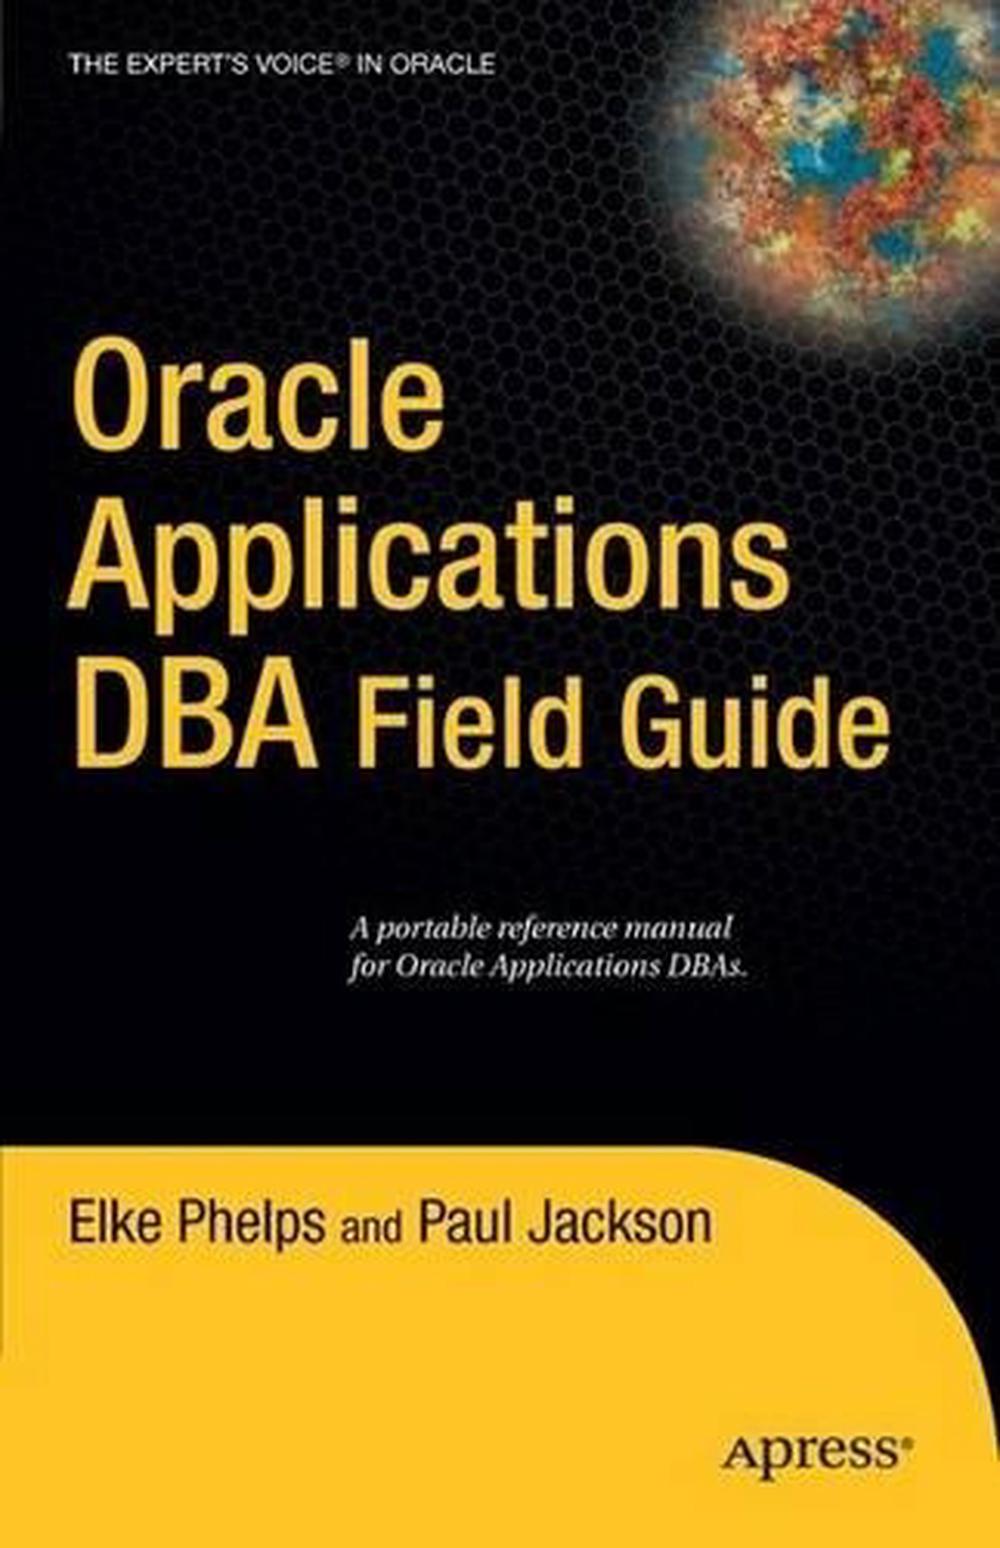 Oracle Applications DBA Field Guide by Elke Phelps (English) Paperback Book Free 9781590596449